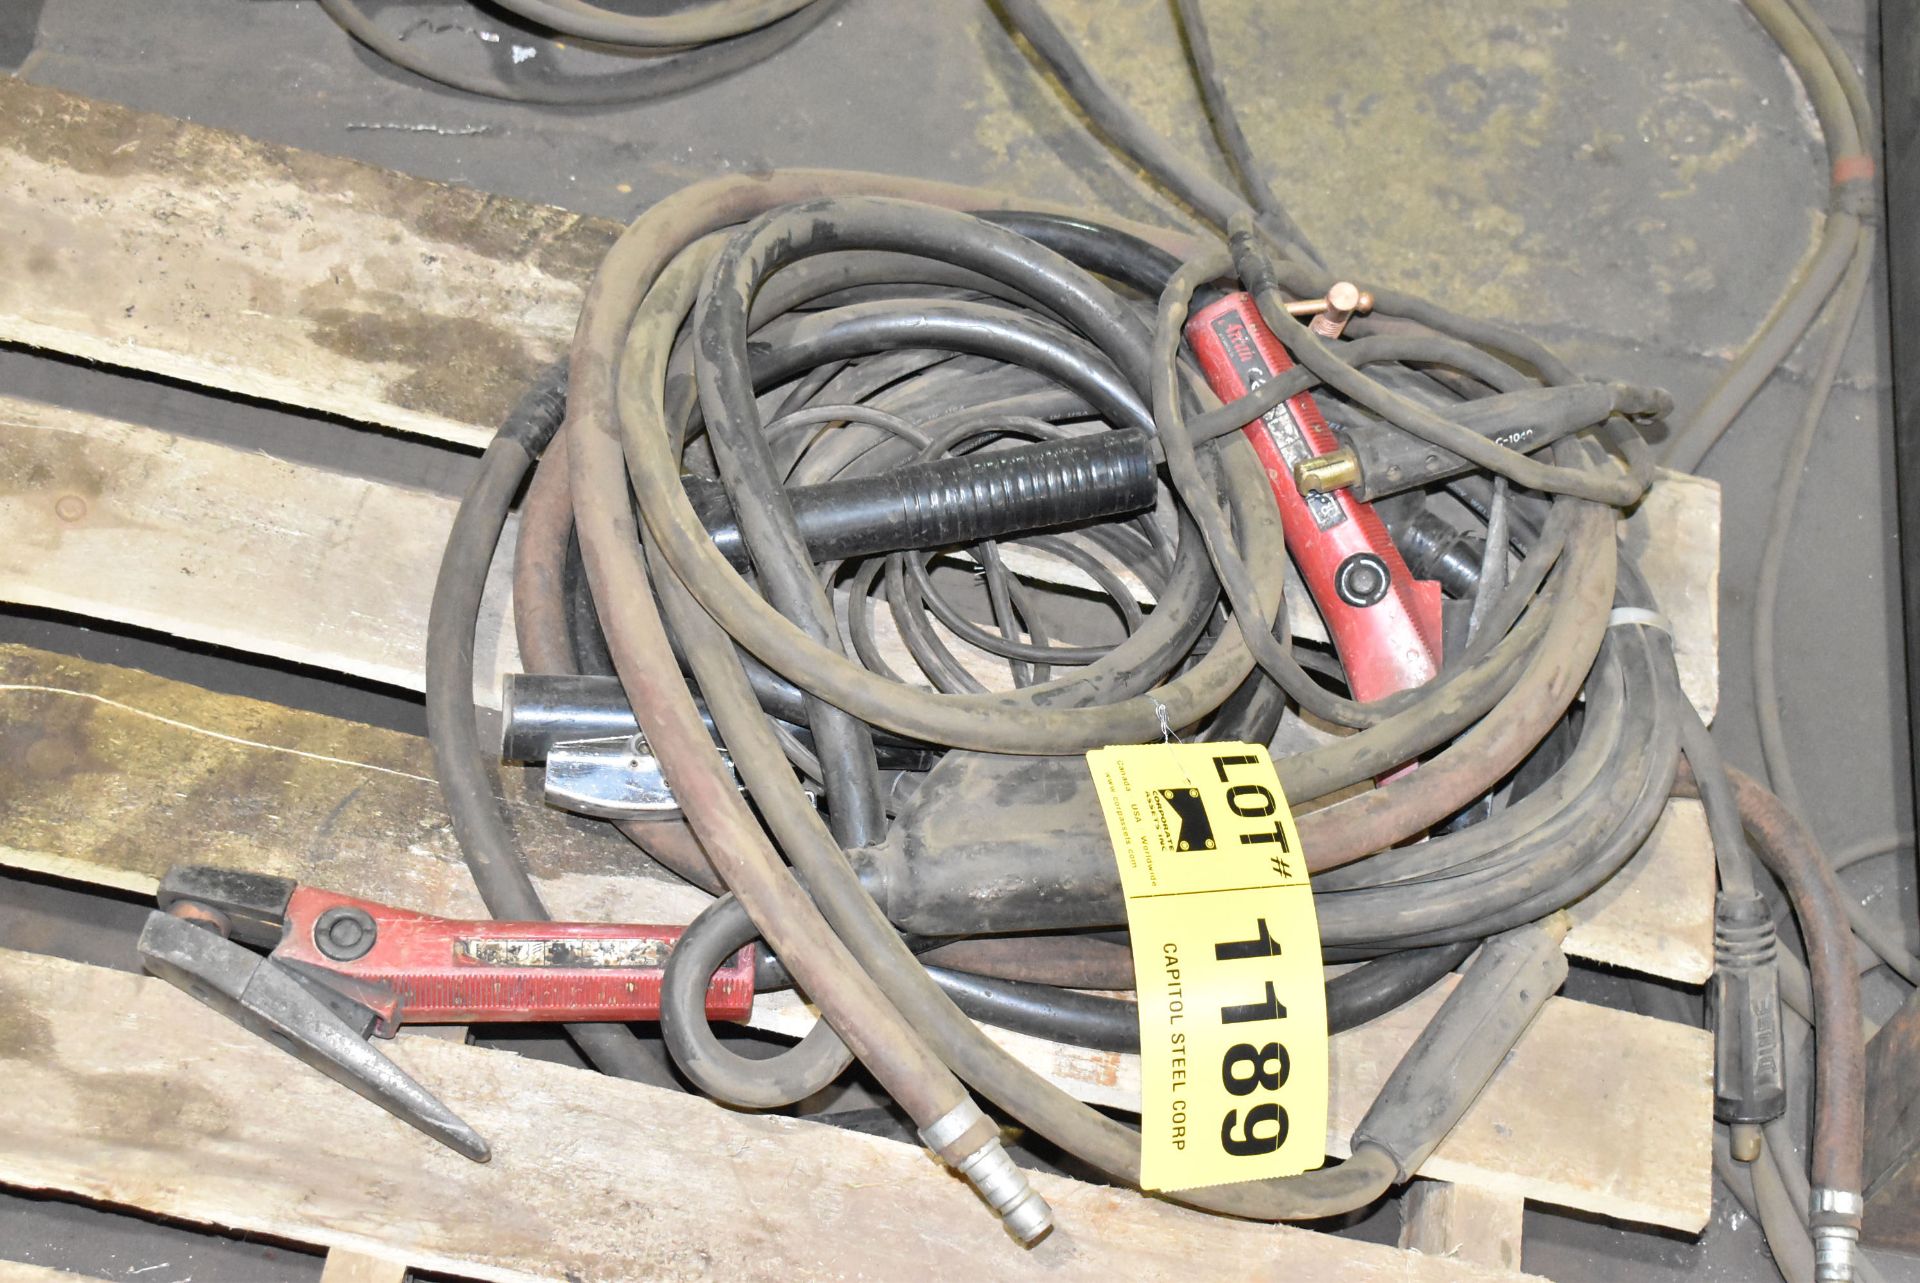 LOT/ ARCAIR GOUGING TORCHES & CABLES [RIGGING FEES FOR LOT #1189 - $30 USD PLUS APPLICABLE TAXES]